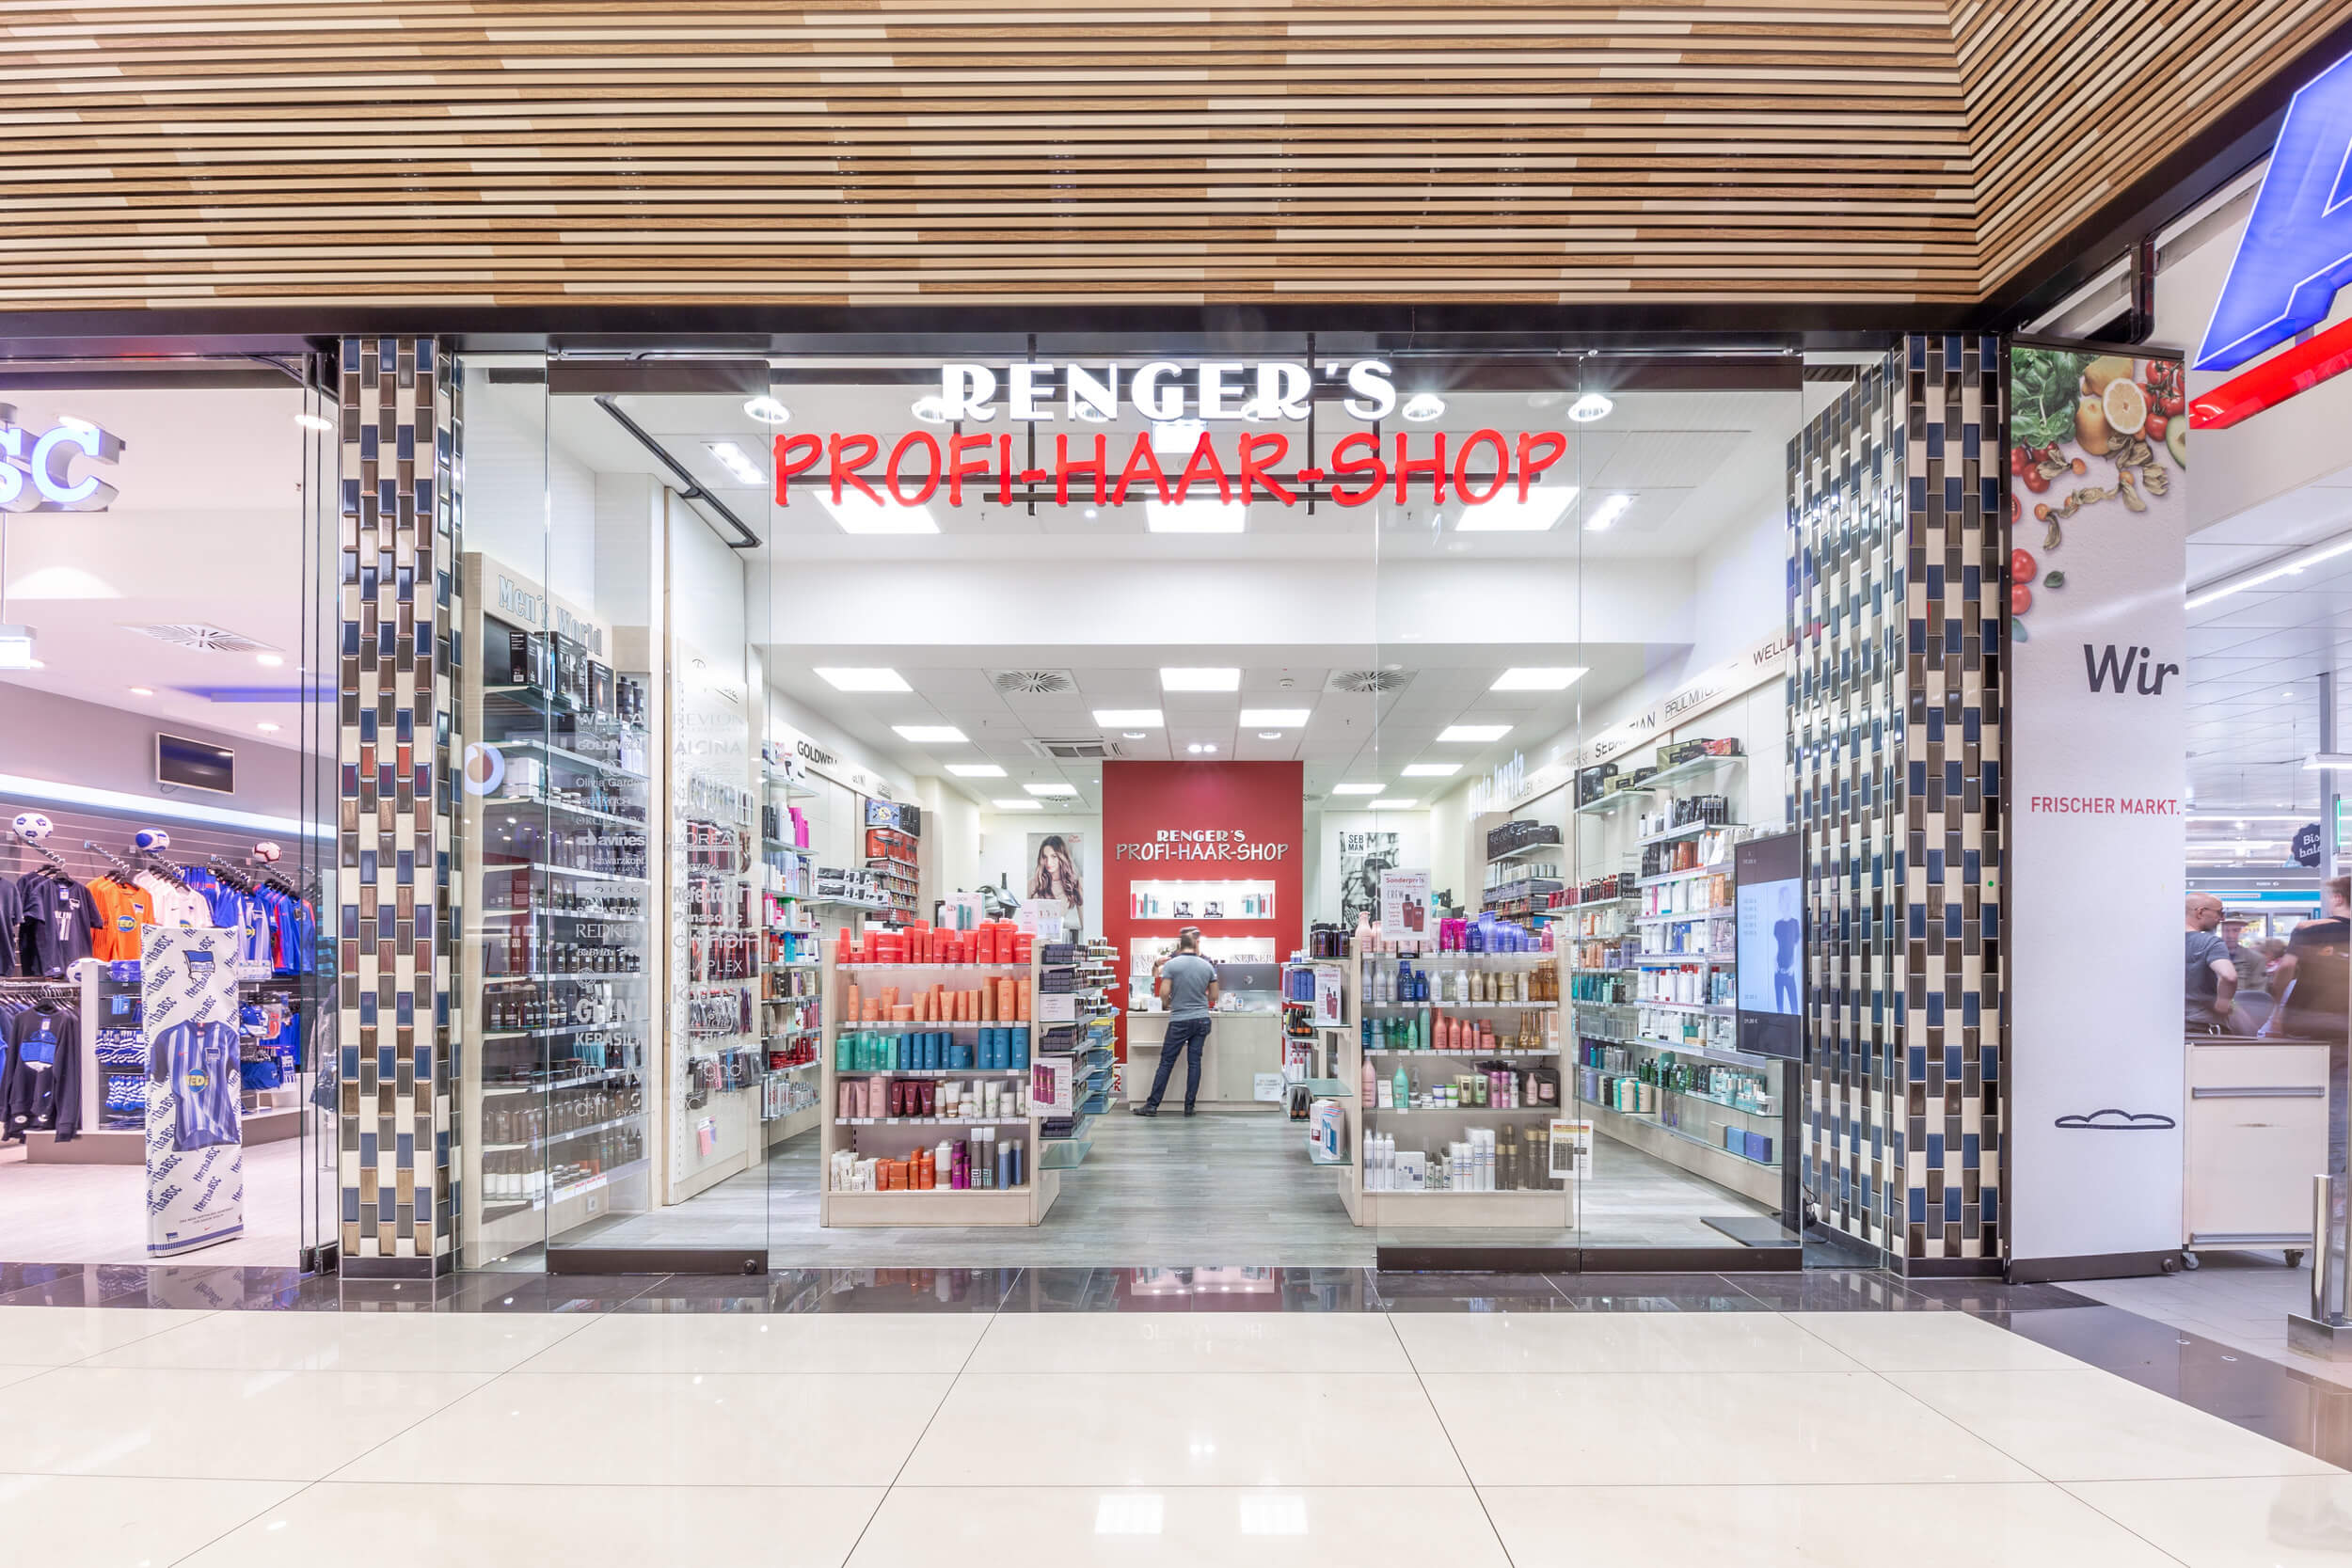 Rengers Profi Haarshop Powered by Friseur Hairconcept at the Mall of Berlin